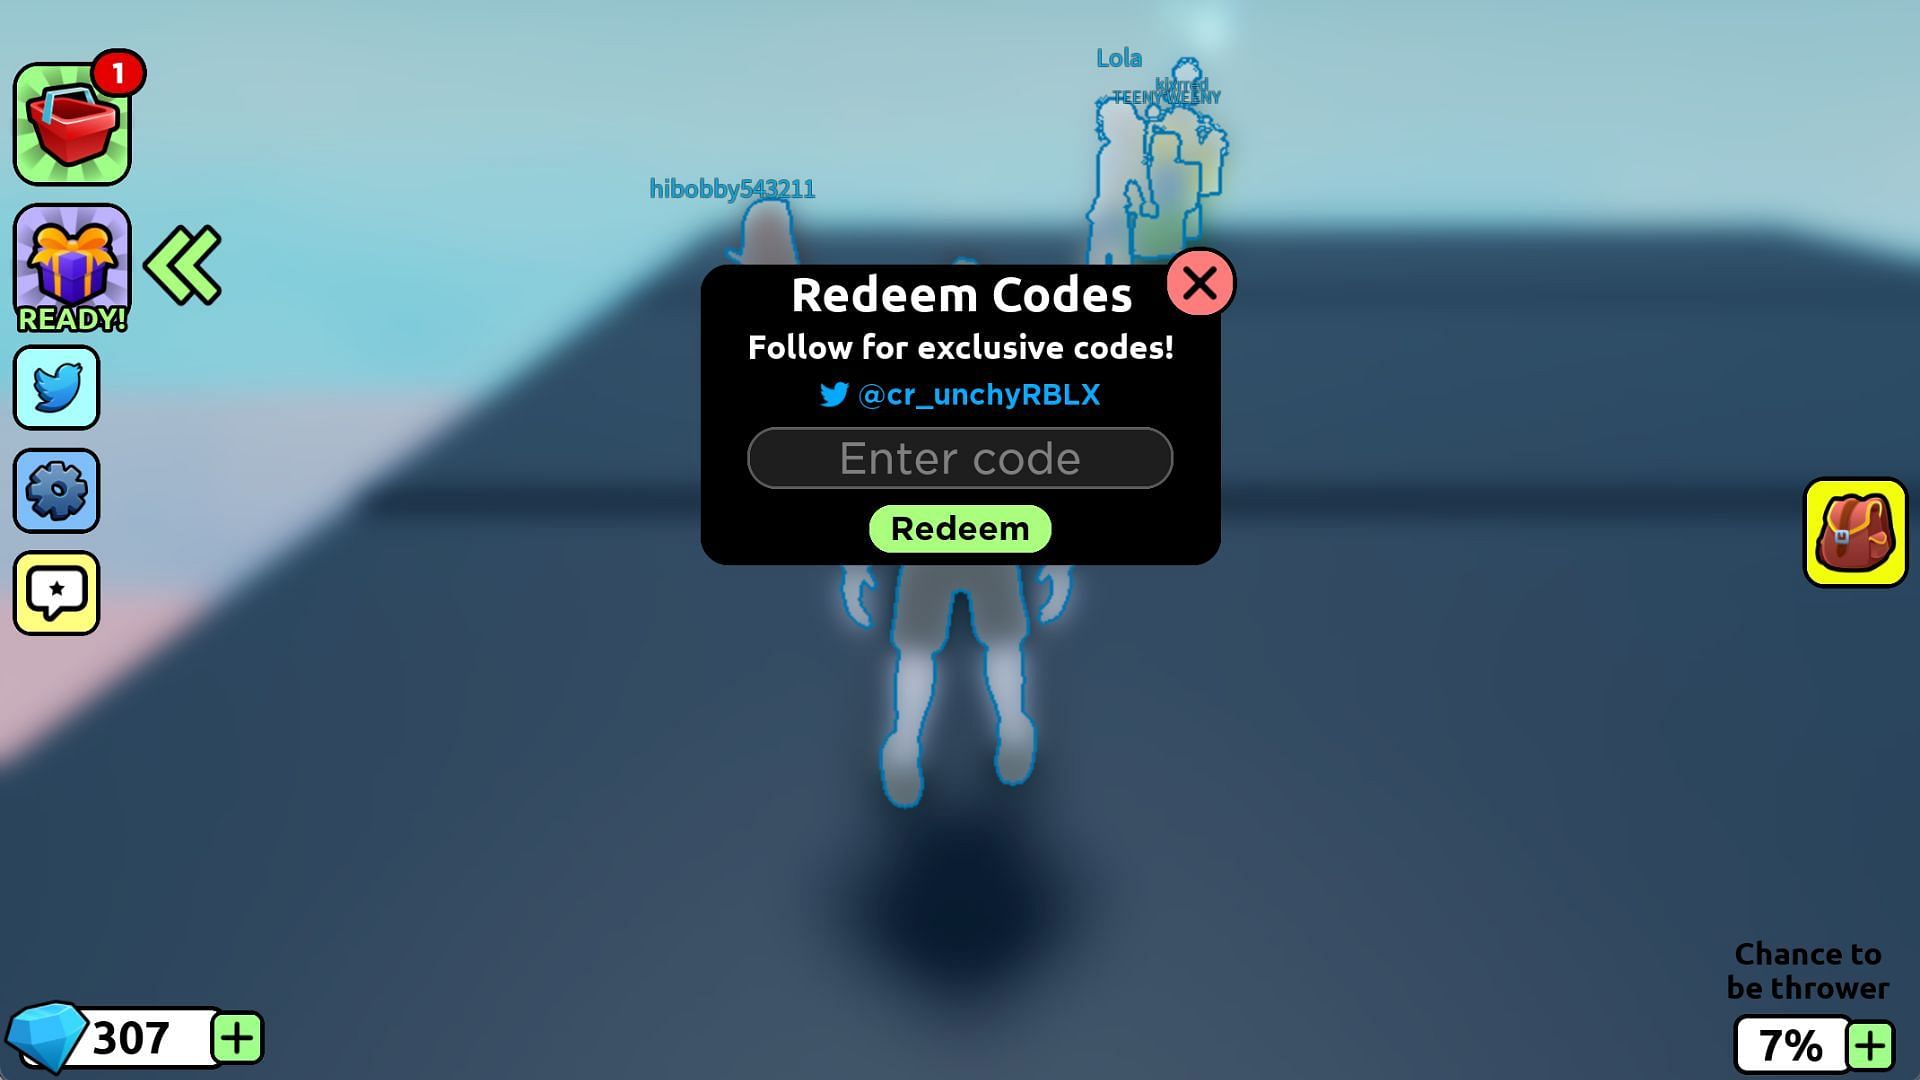 The code redemption process (Image via Roblox)